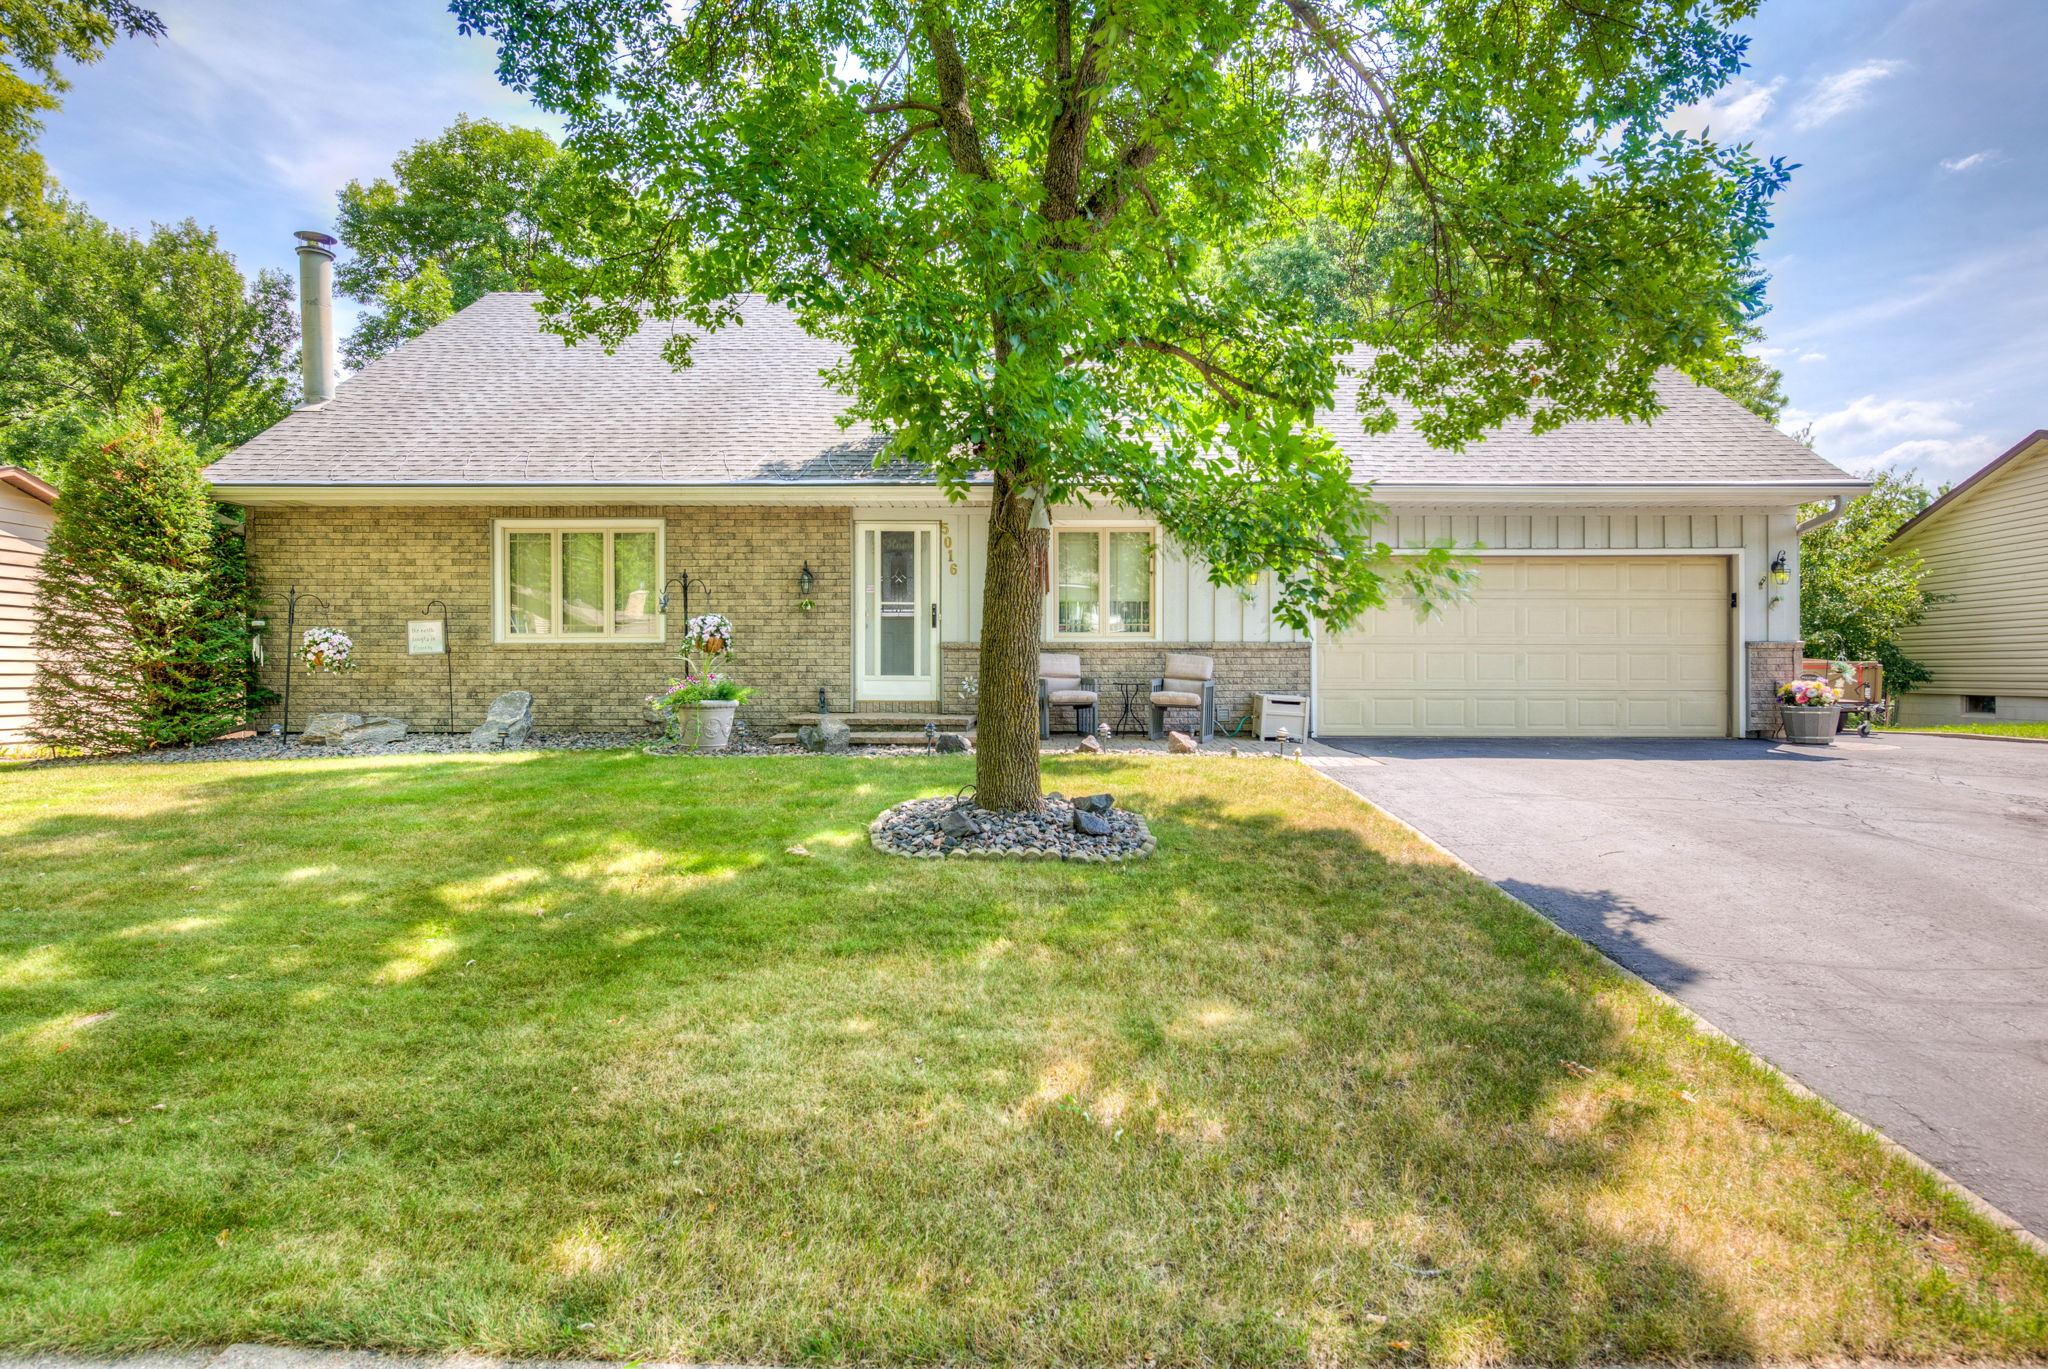  5016 142nd Path W, Apple Valley, MN 55124, US